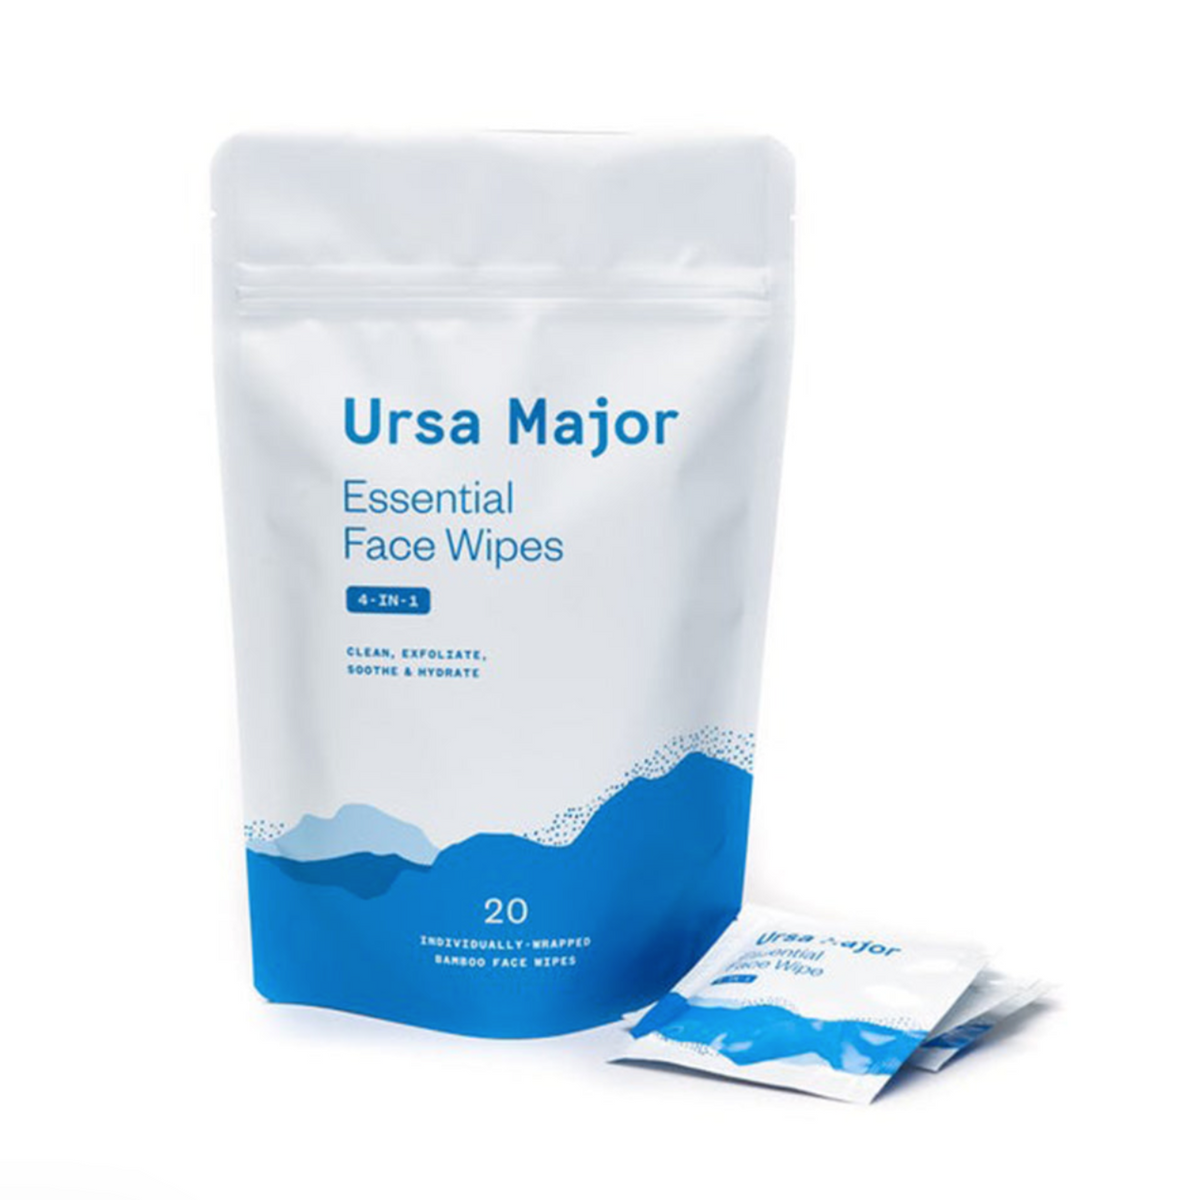 4-in-1 Essential Wipes